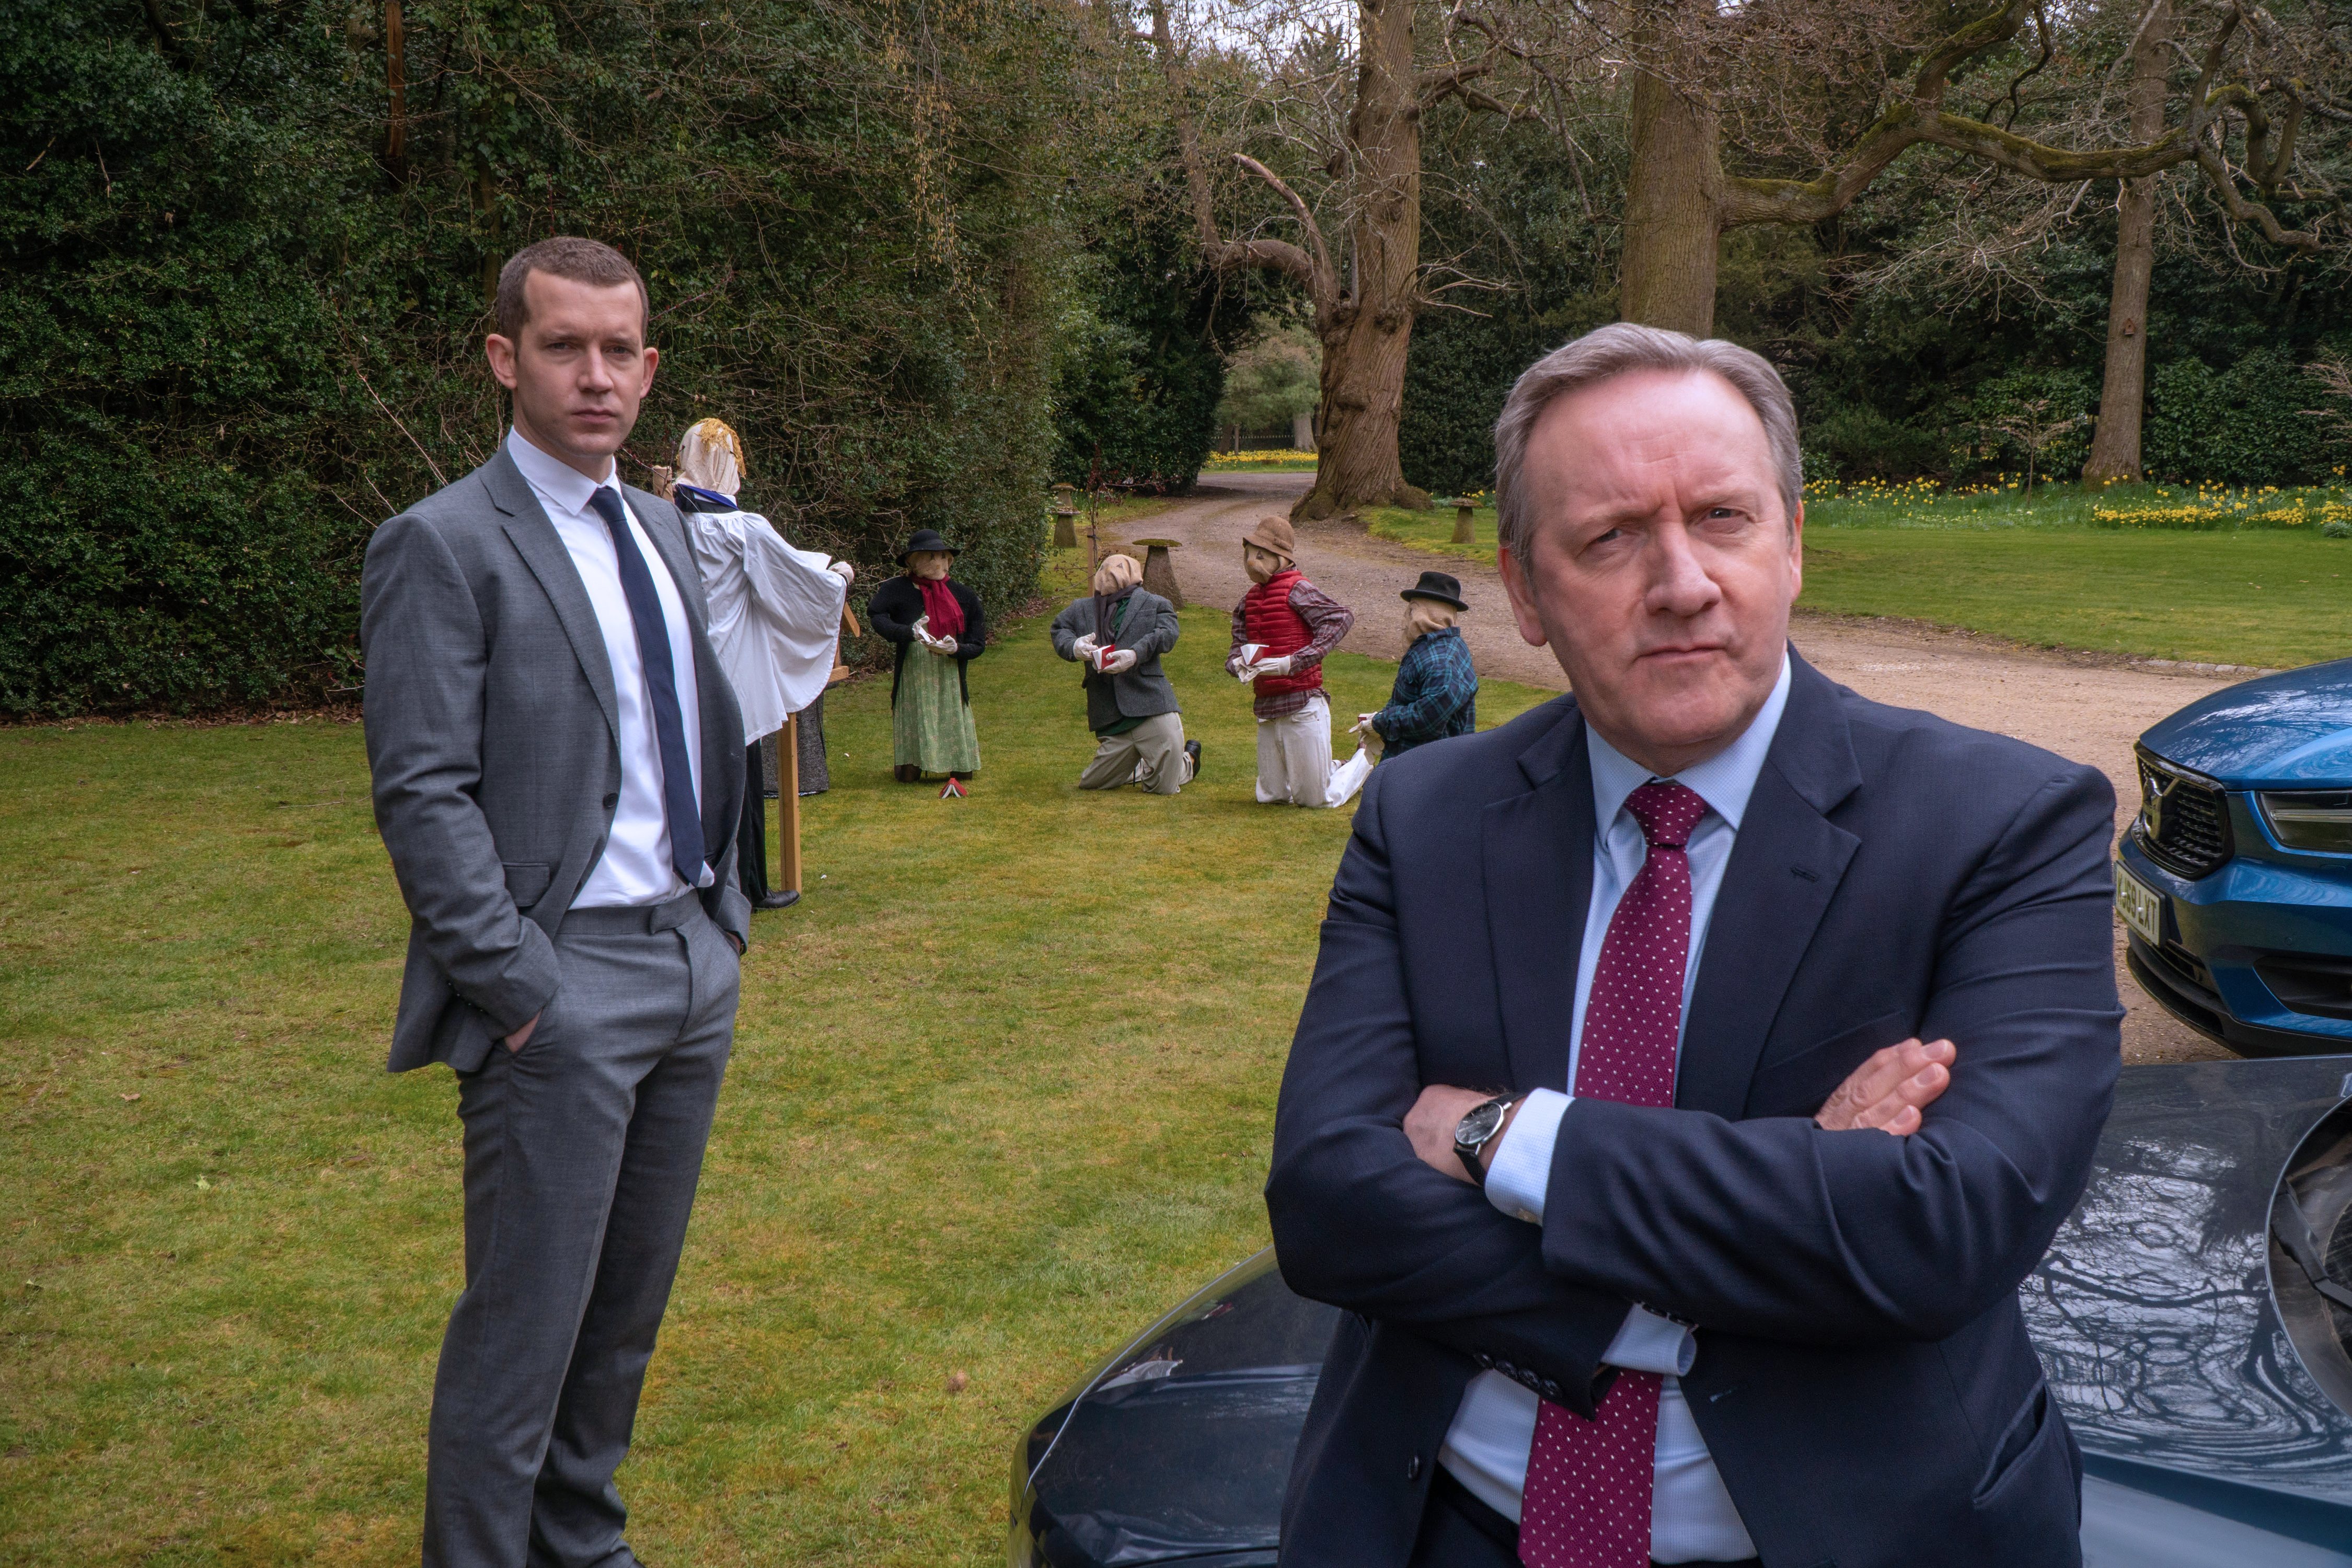 Acorn TV’s October 2021 Lineup Includes New Episodes of ‘Midsomer Murders’ and More